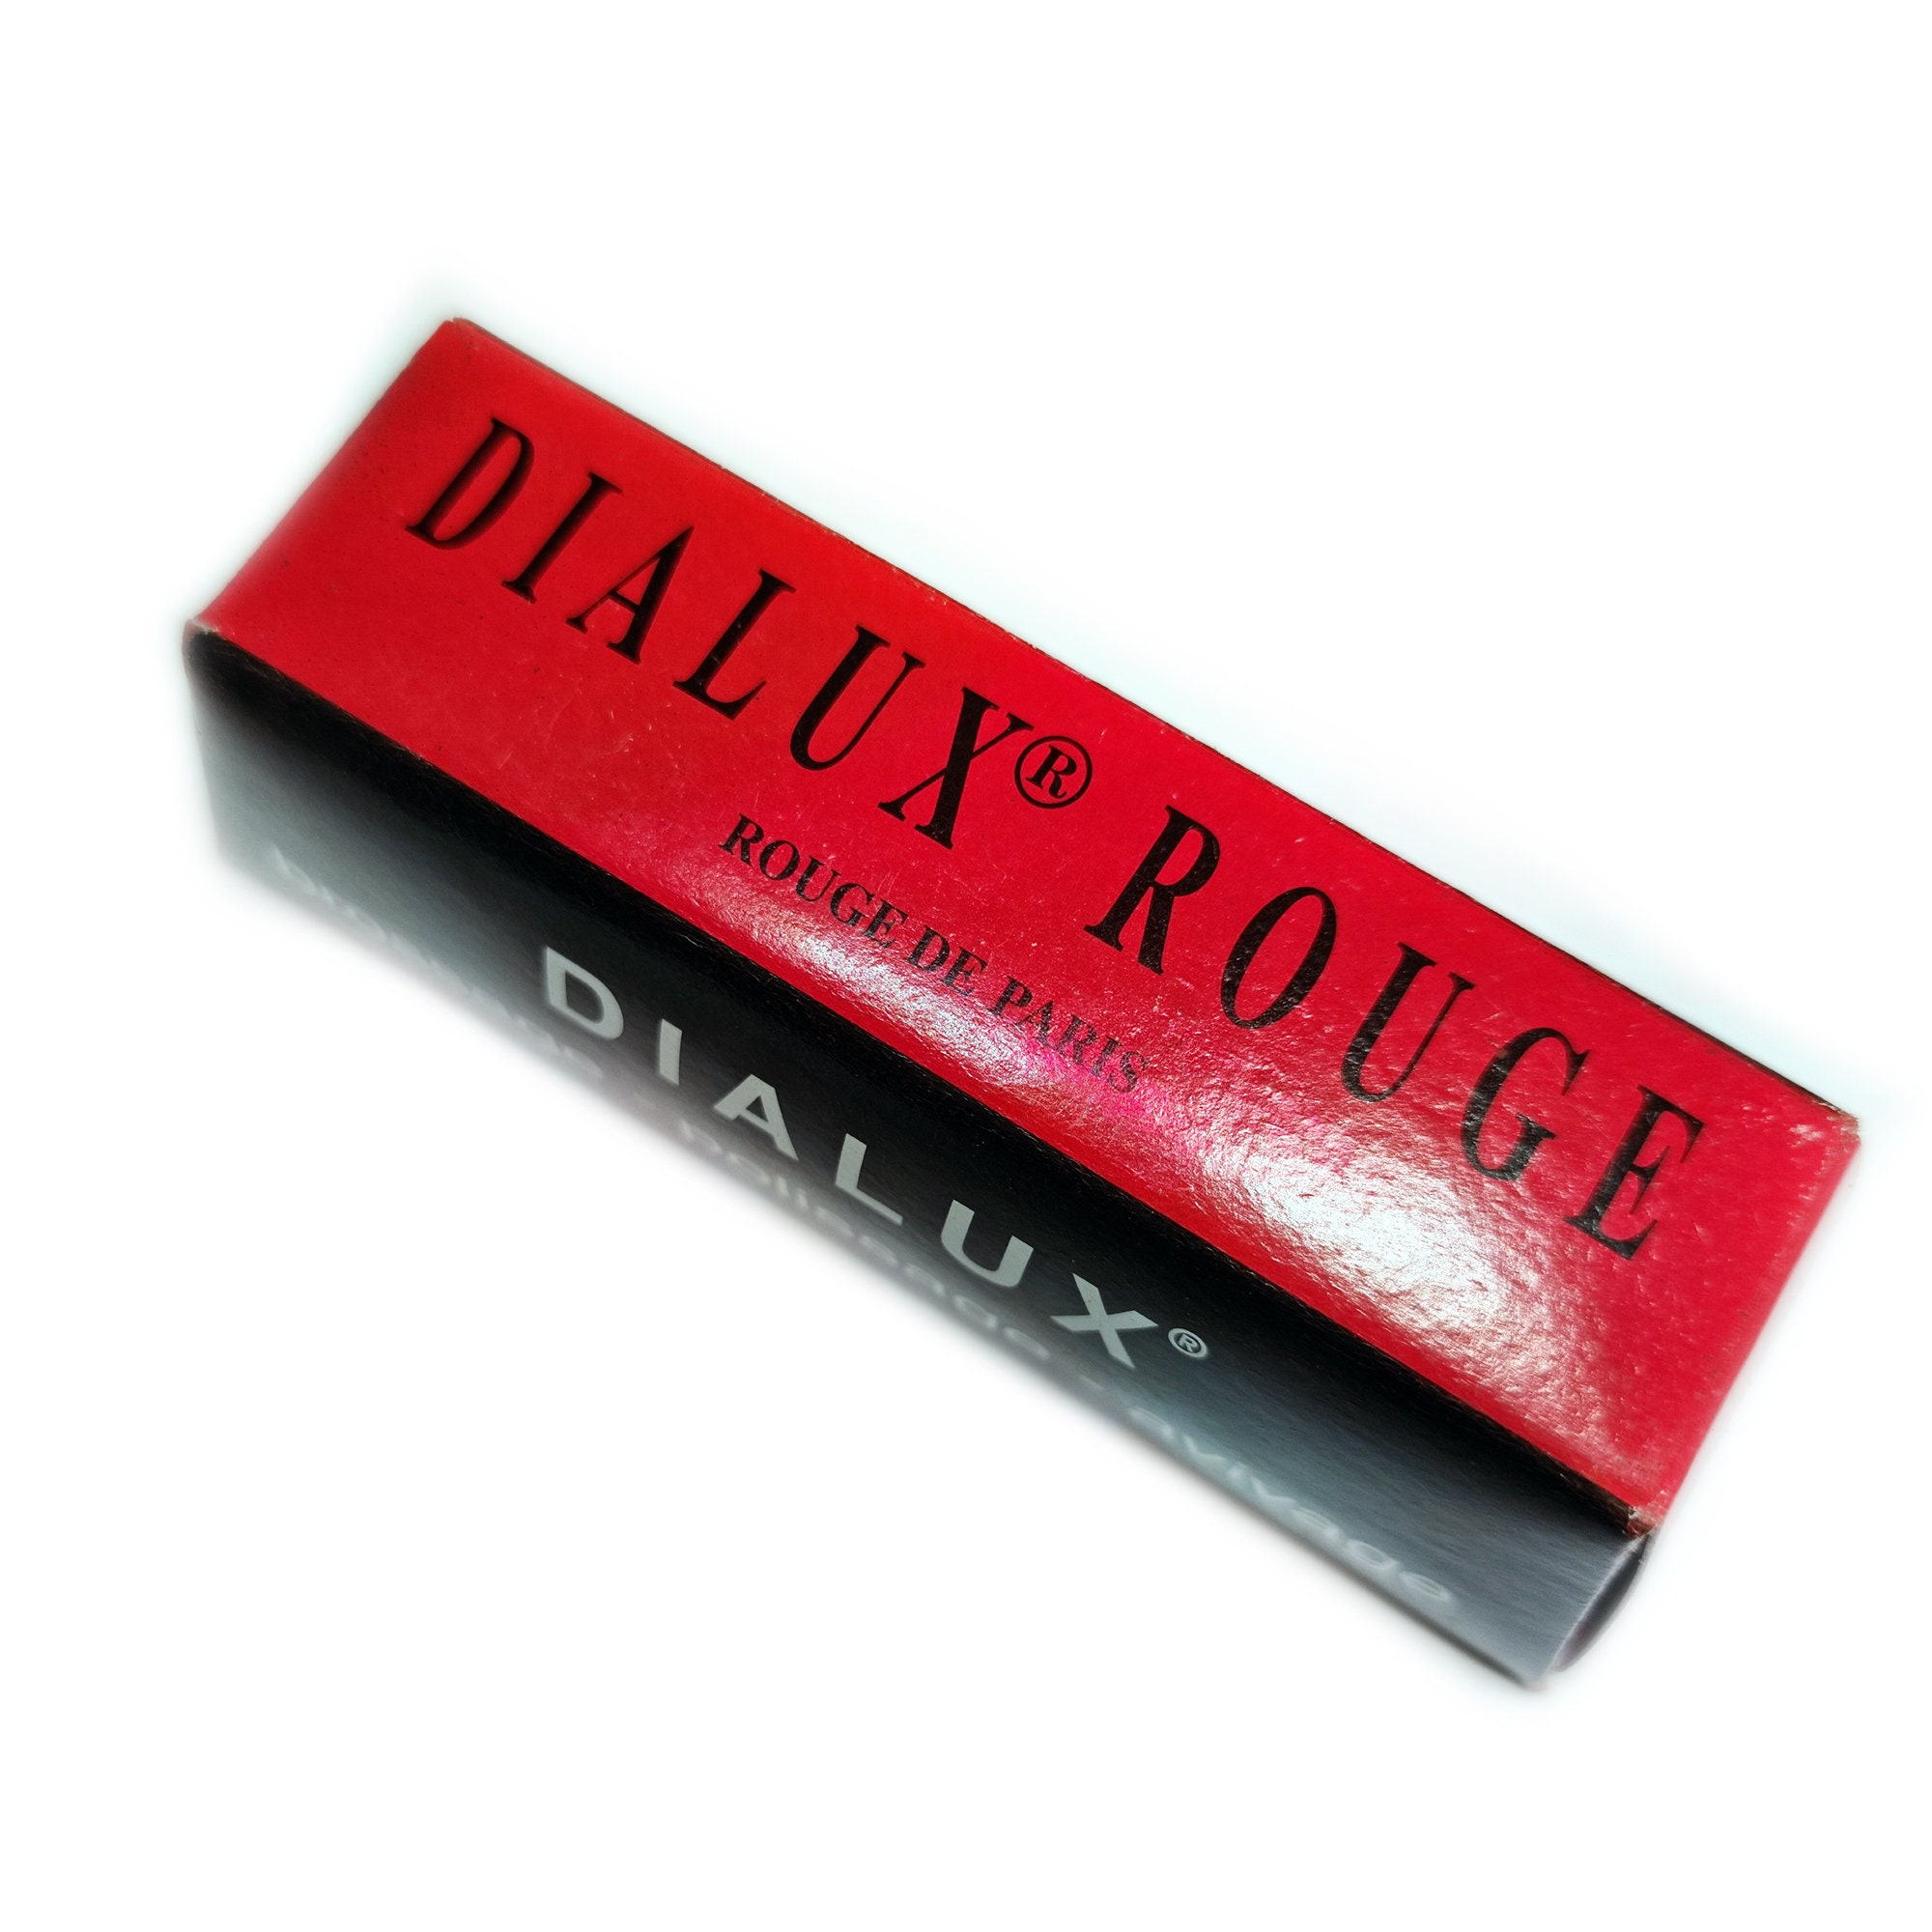 JEWELERS ROUGE POLISH GOLD SILVER JEWELRY DIALUX ROUGE GREEN WHITE & RED -3  BARS